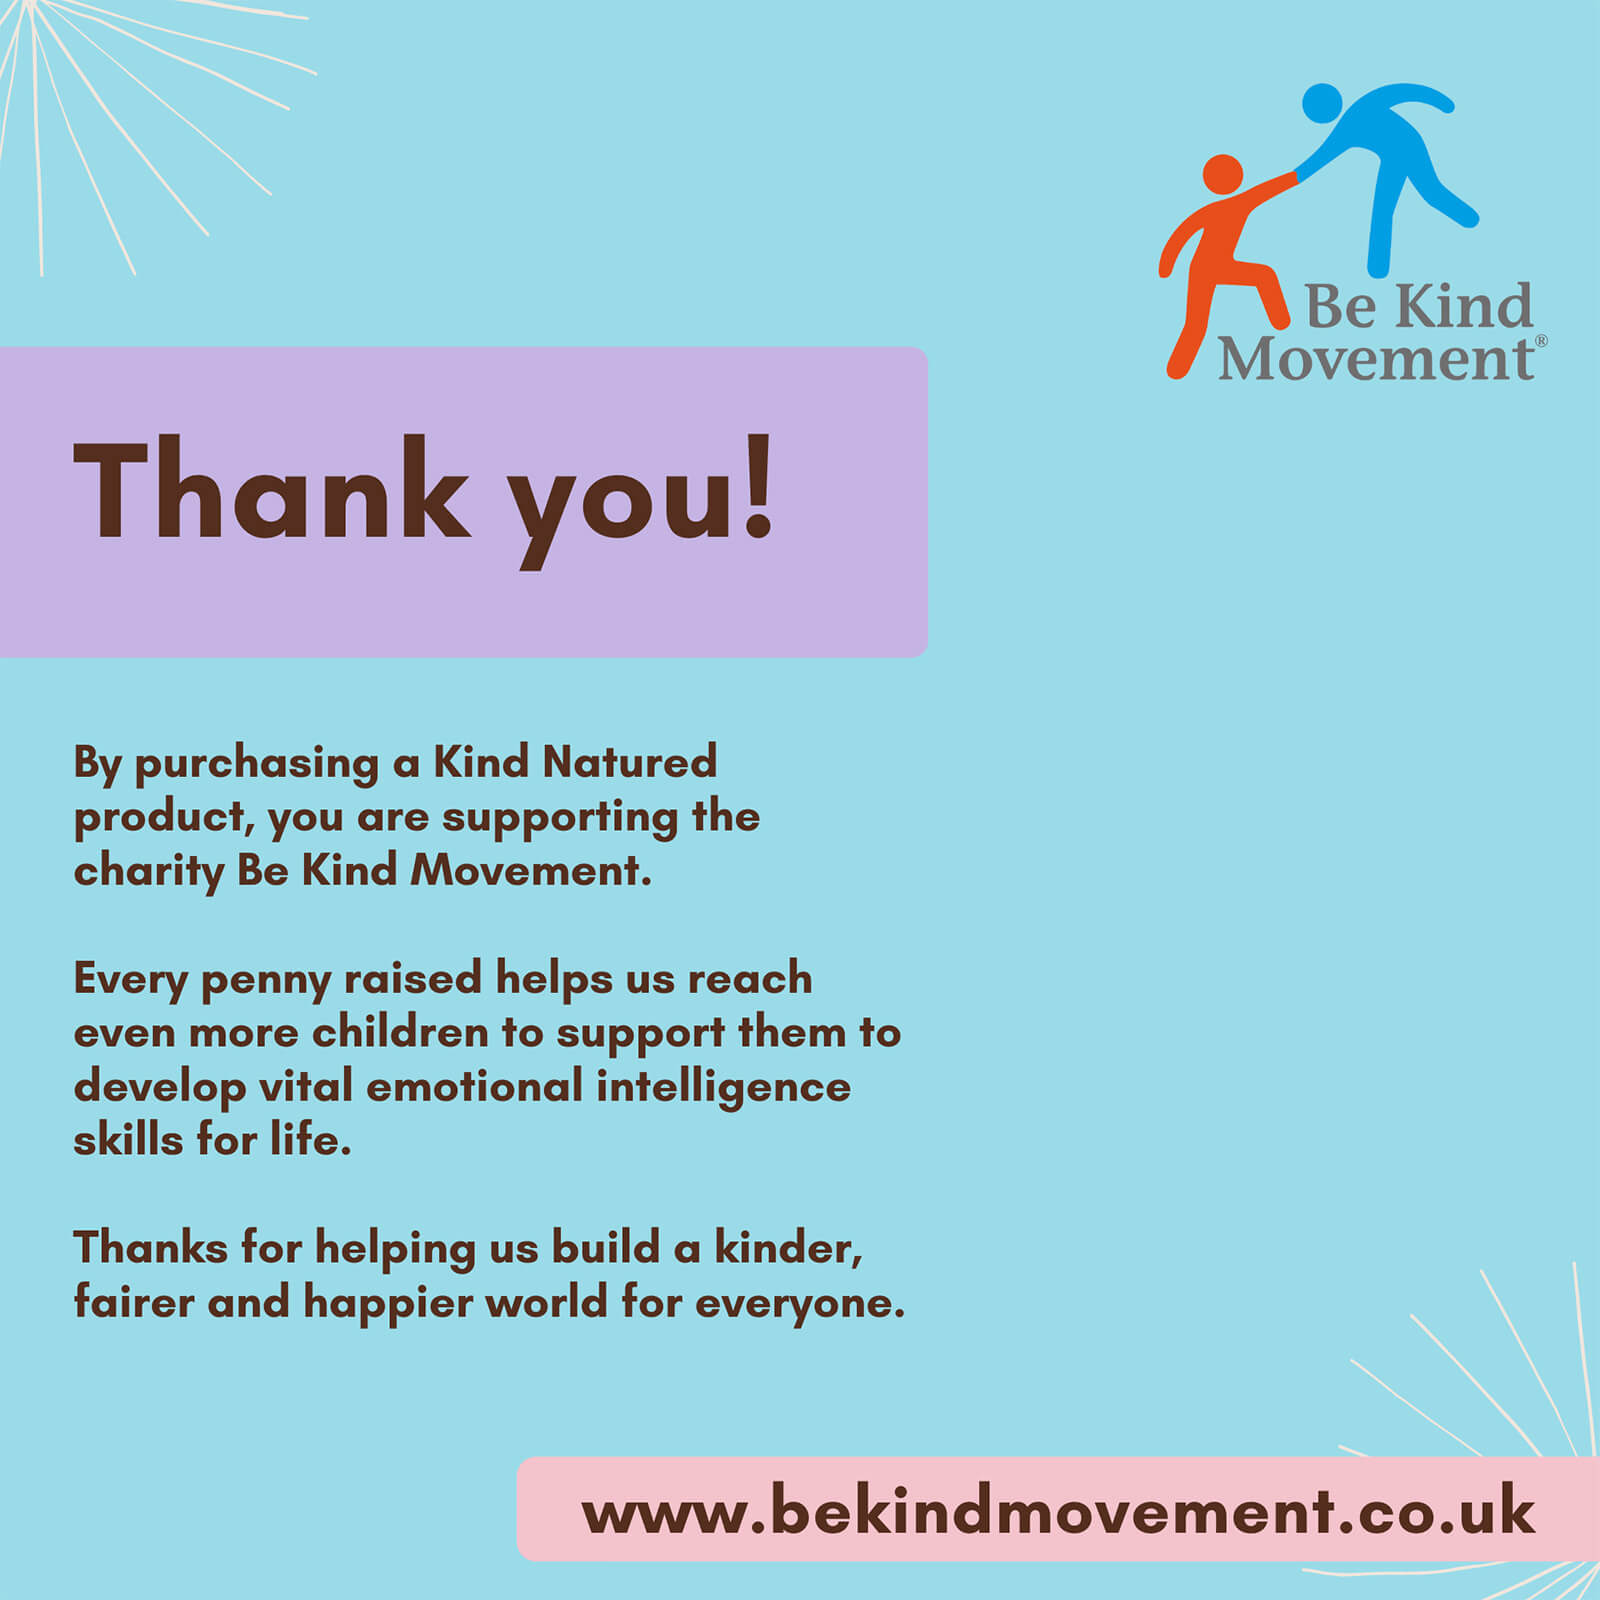 Be kind movement. Thank you! By purchasing a kind natured product,you are supporting the charity Be kind movement. Every penny raised helps u reach even more children to support them to develop vital emotional intelligence skills for life. Thanks for helping us build a kinder, fairer and happier world for everyone. www.bekindmovement.co.uk 